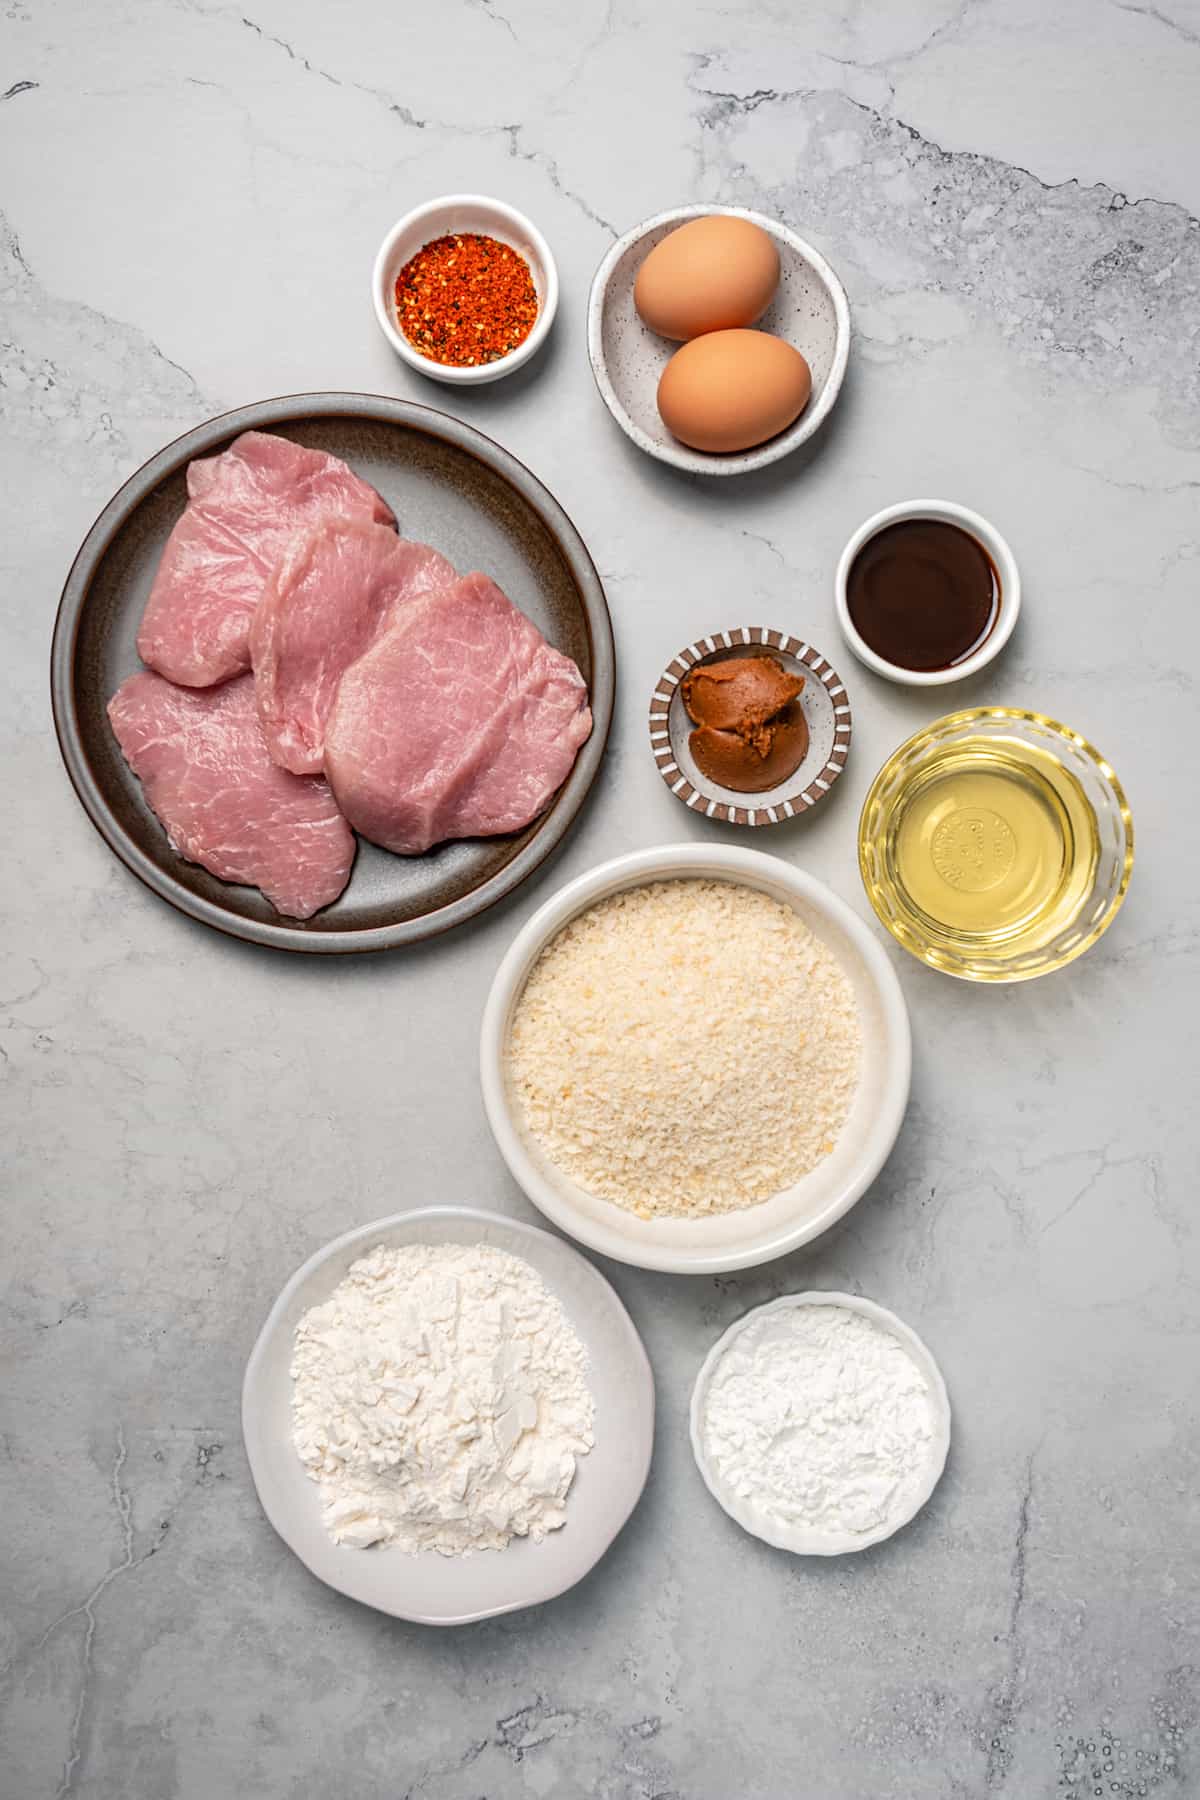 The ingredients for pork katsu measured and arranged in dishes on a work surface.